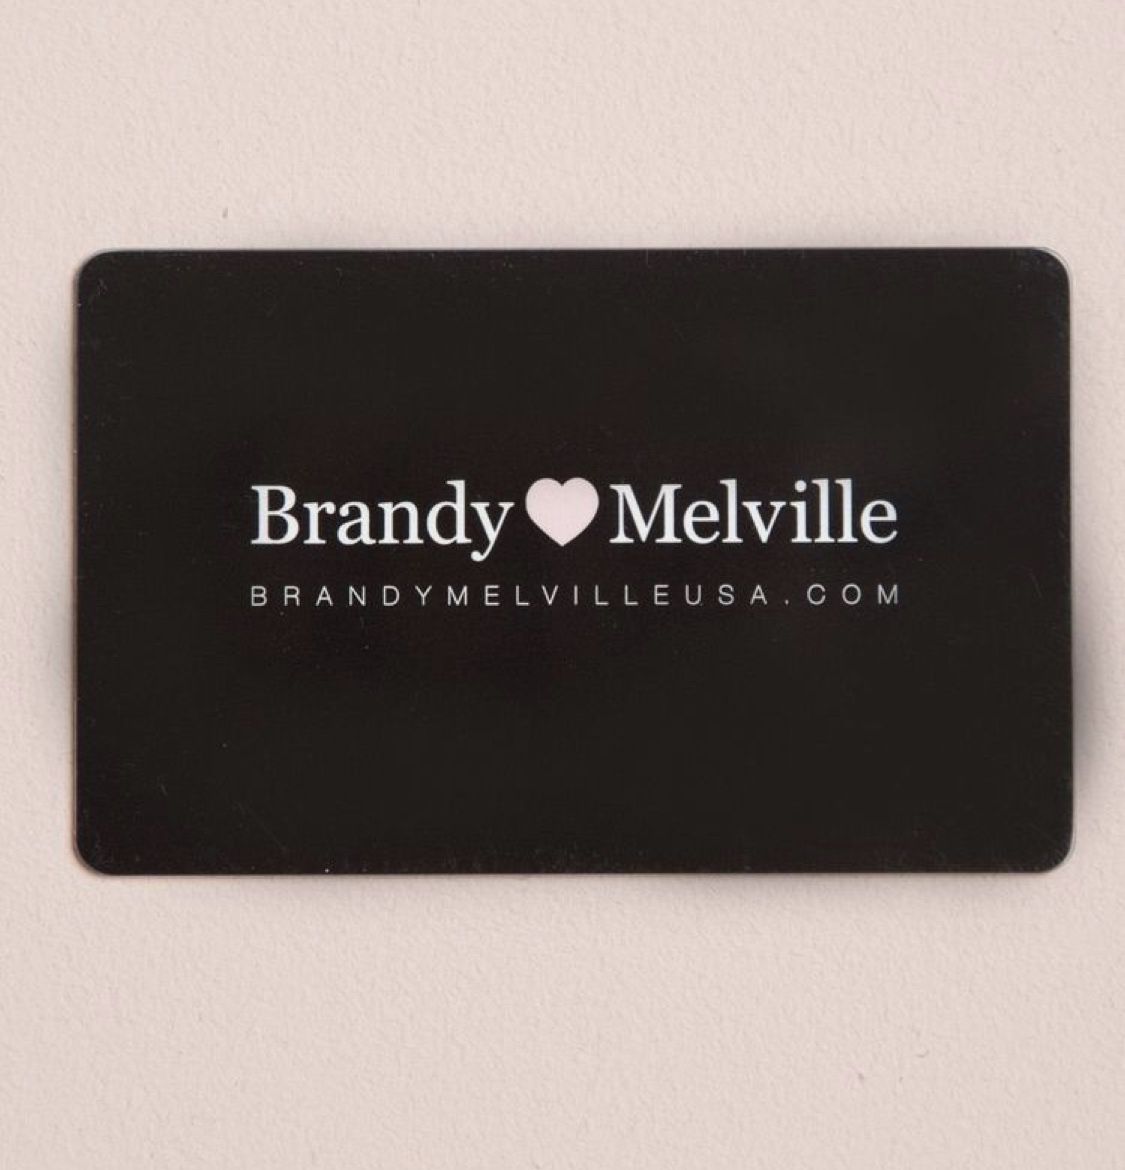 How To Check Balance On Brandy Melville